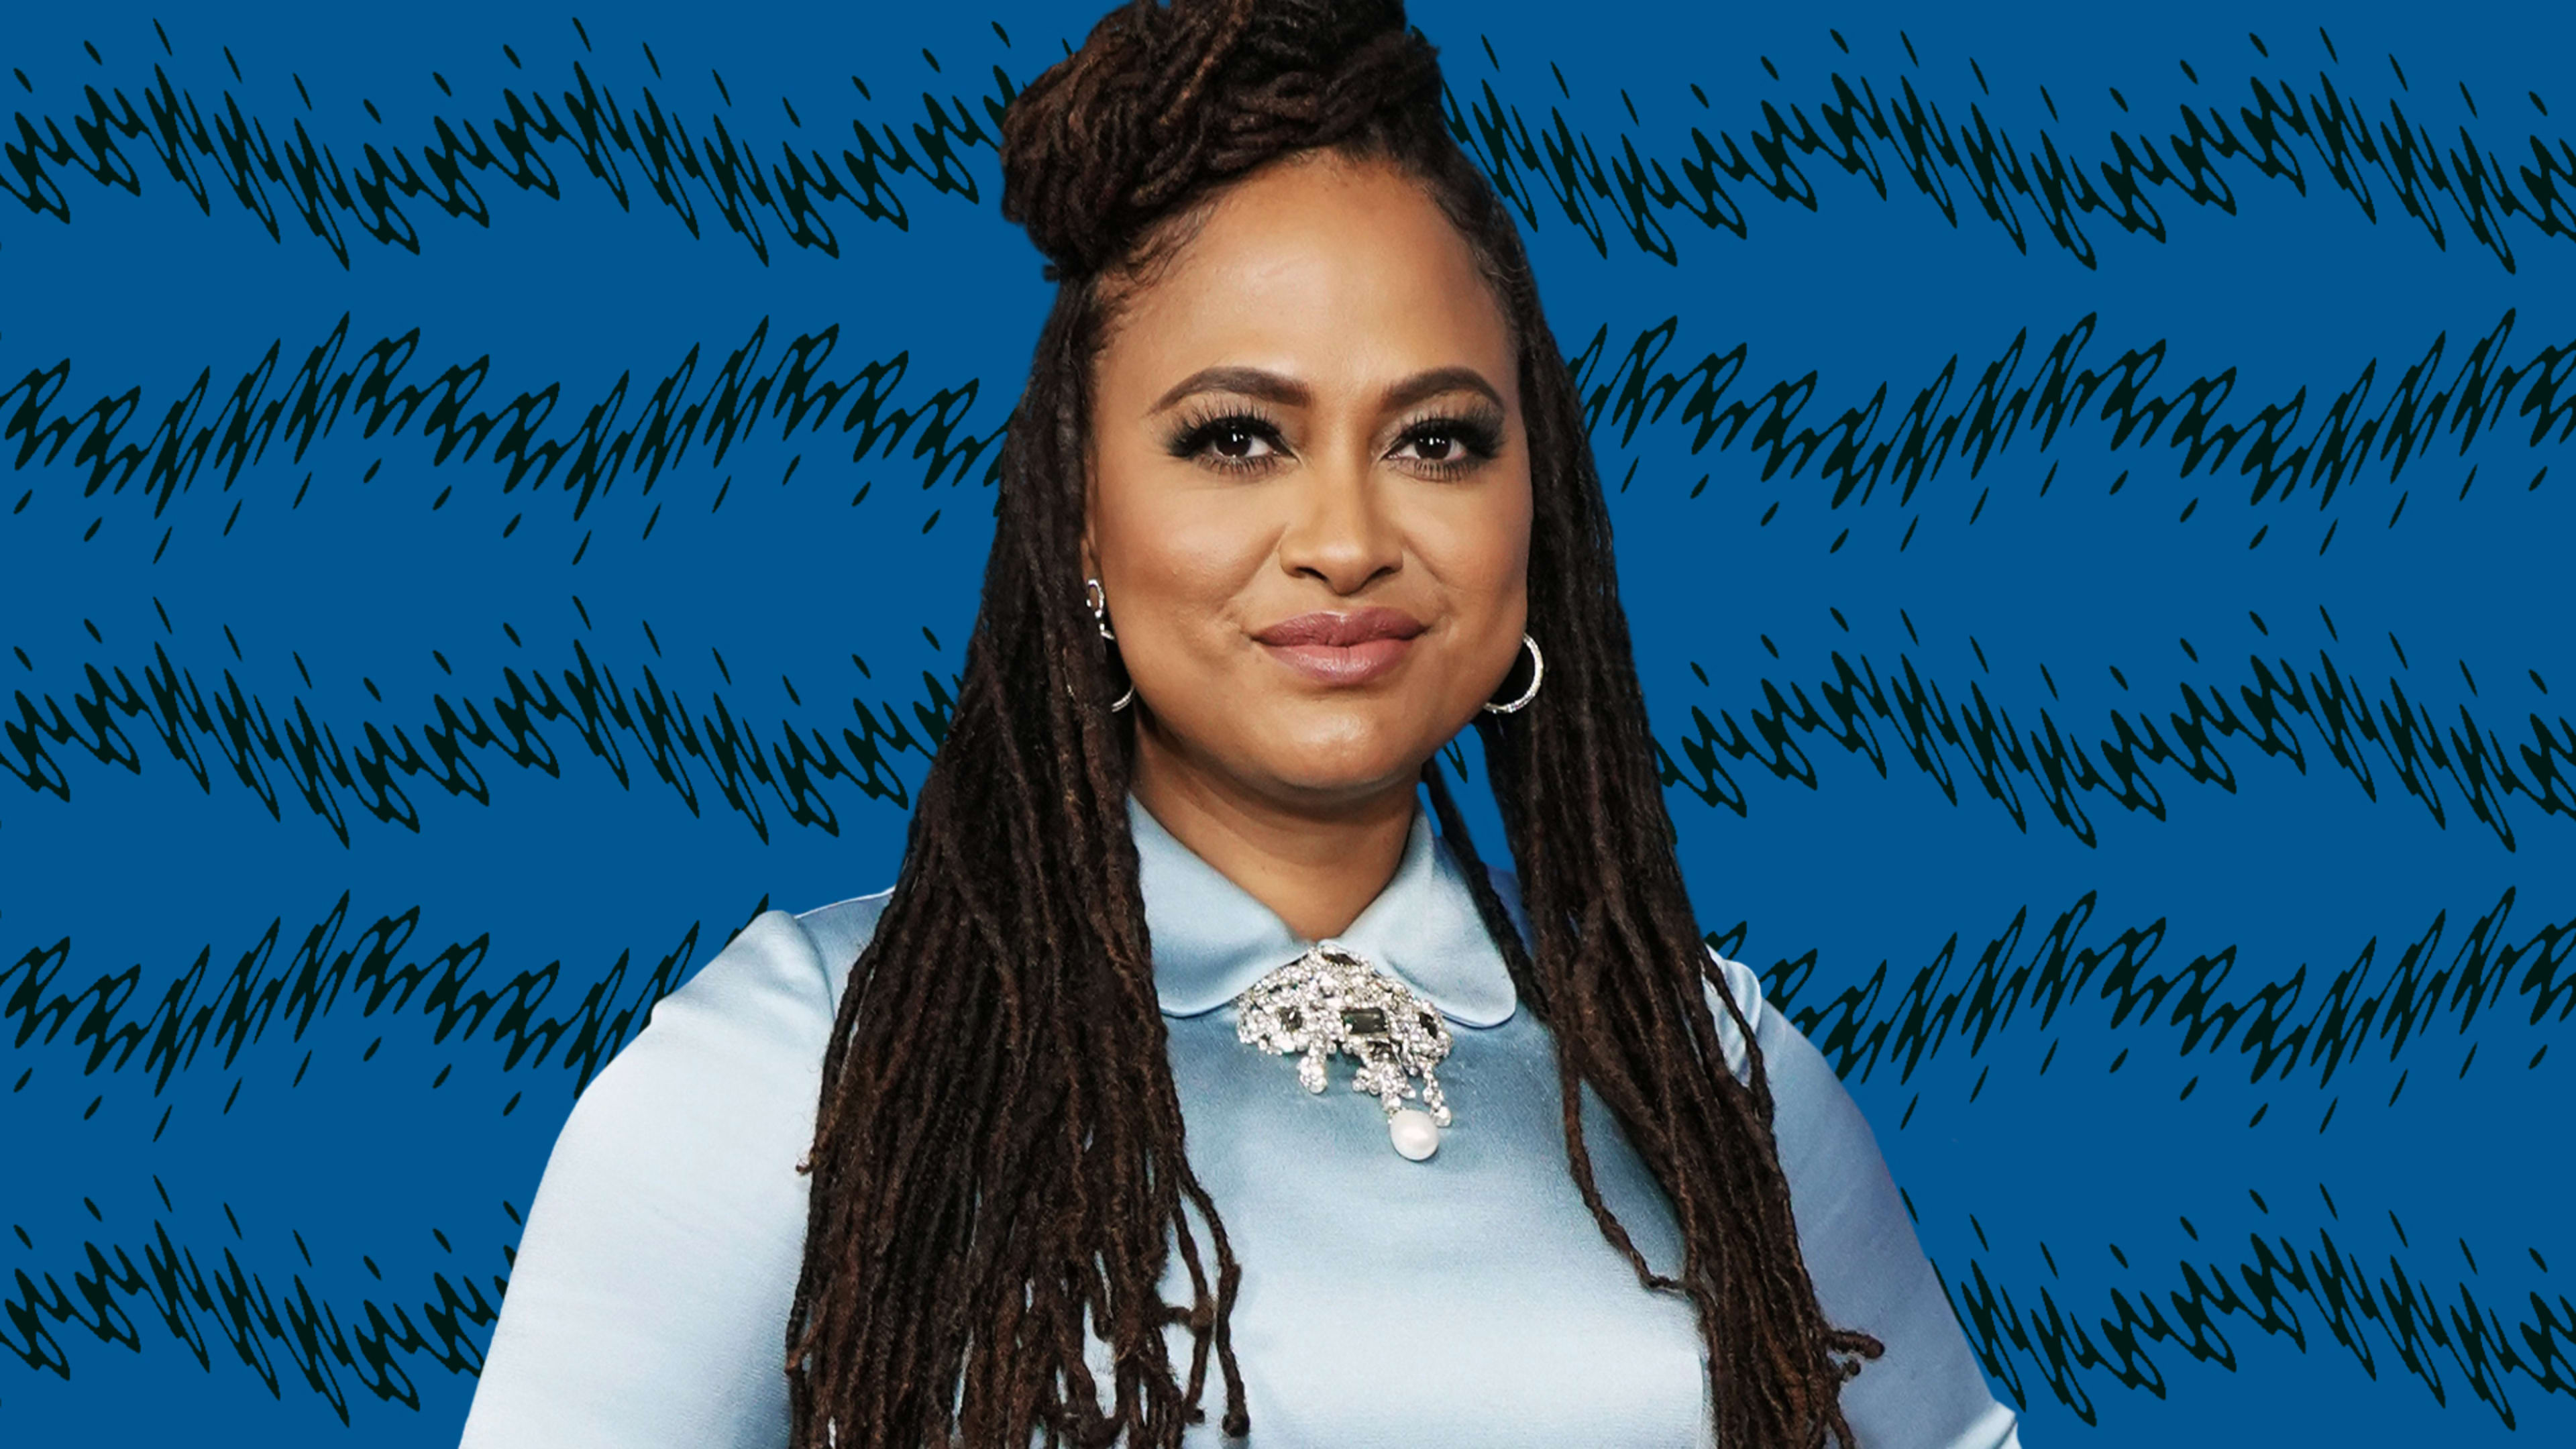 Ava DuVernay launches Array 101, an online education platform to dig deeper into her films’ social themes